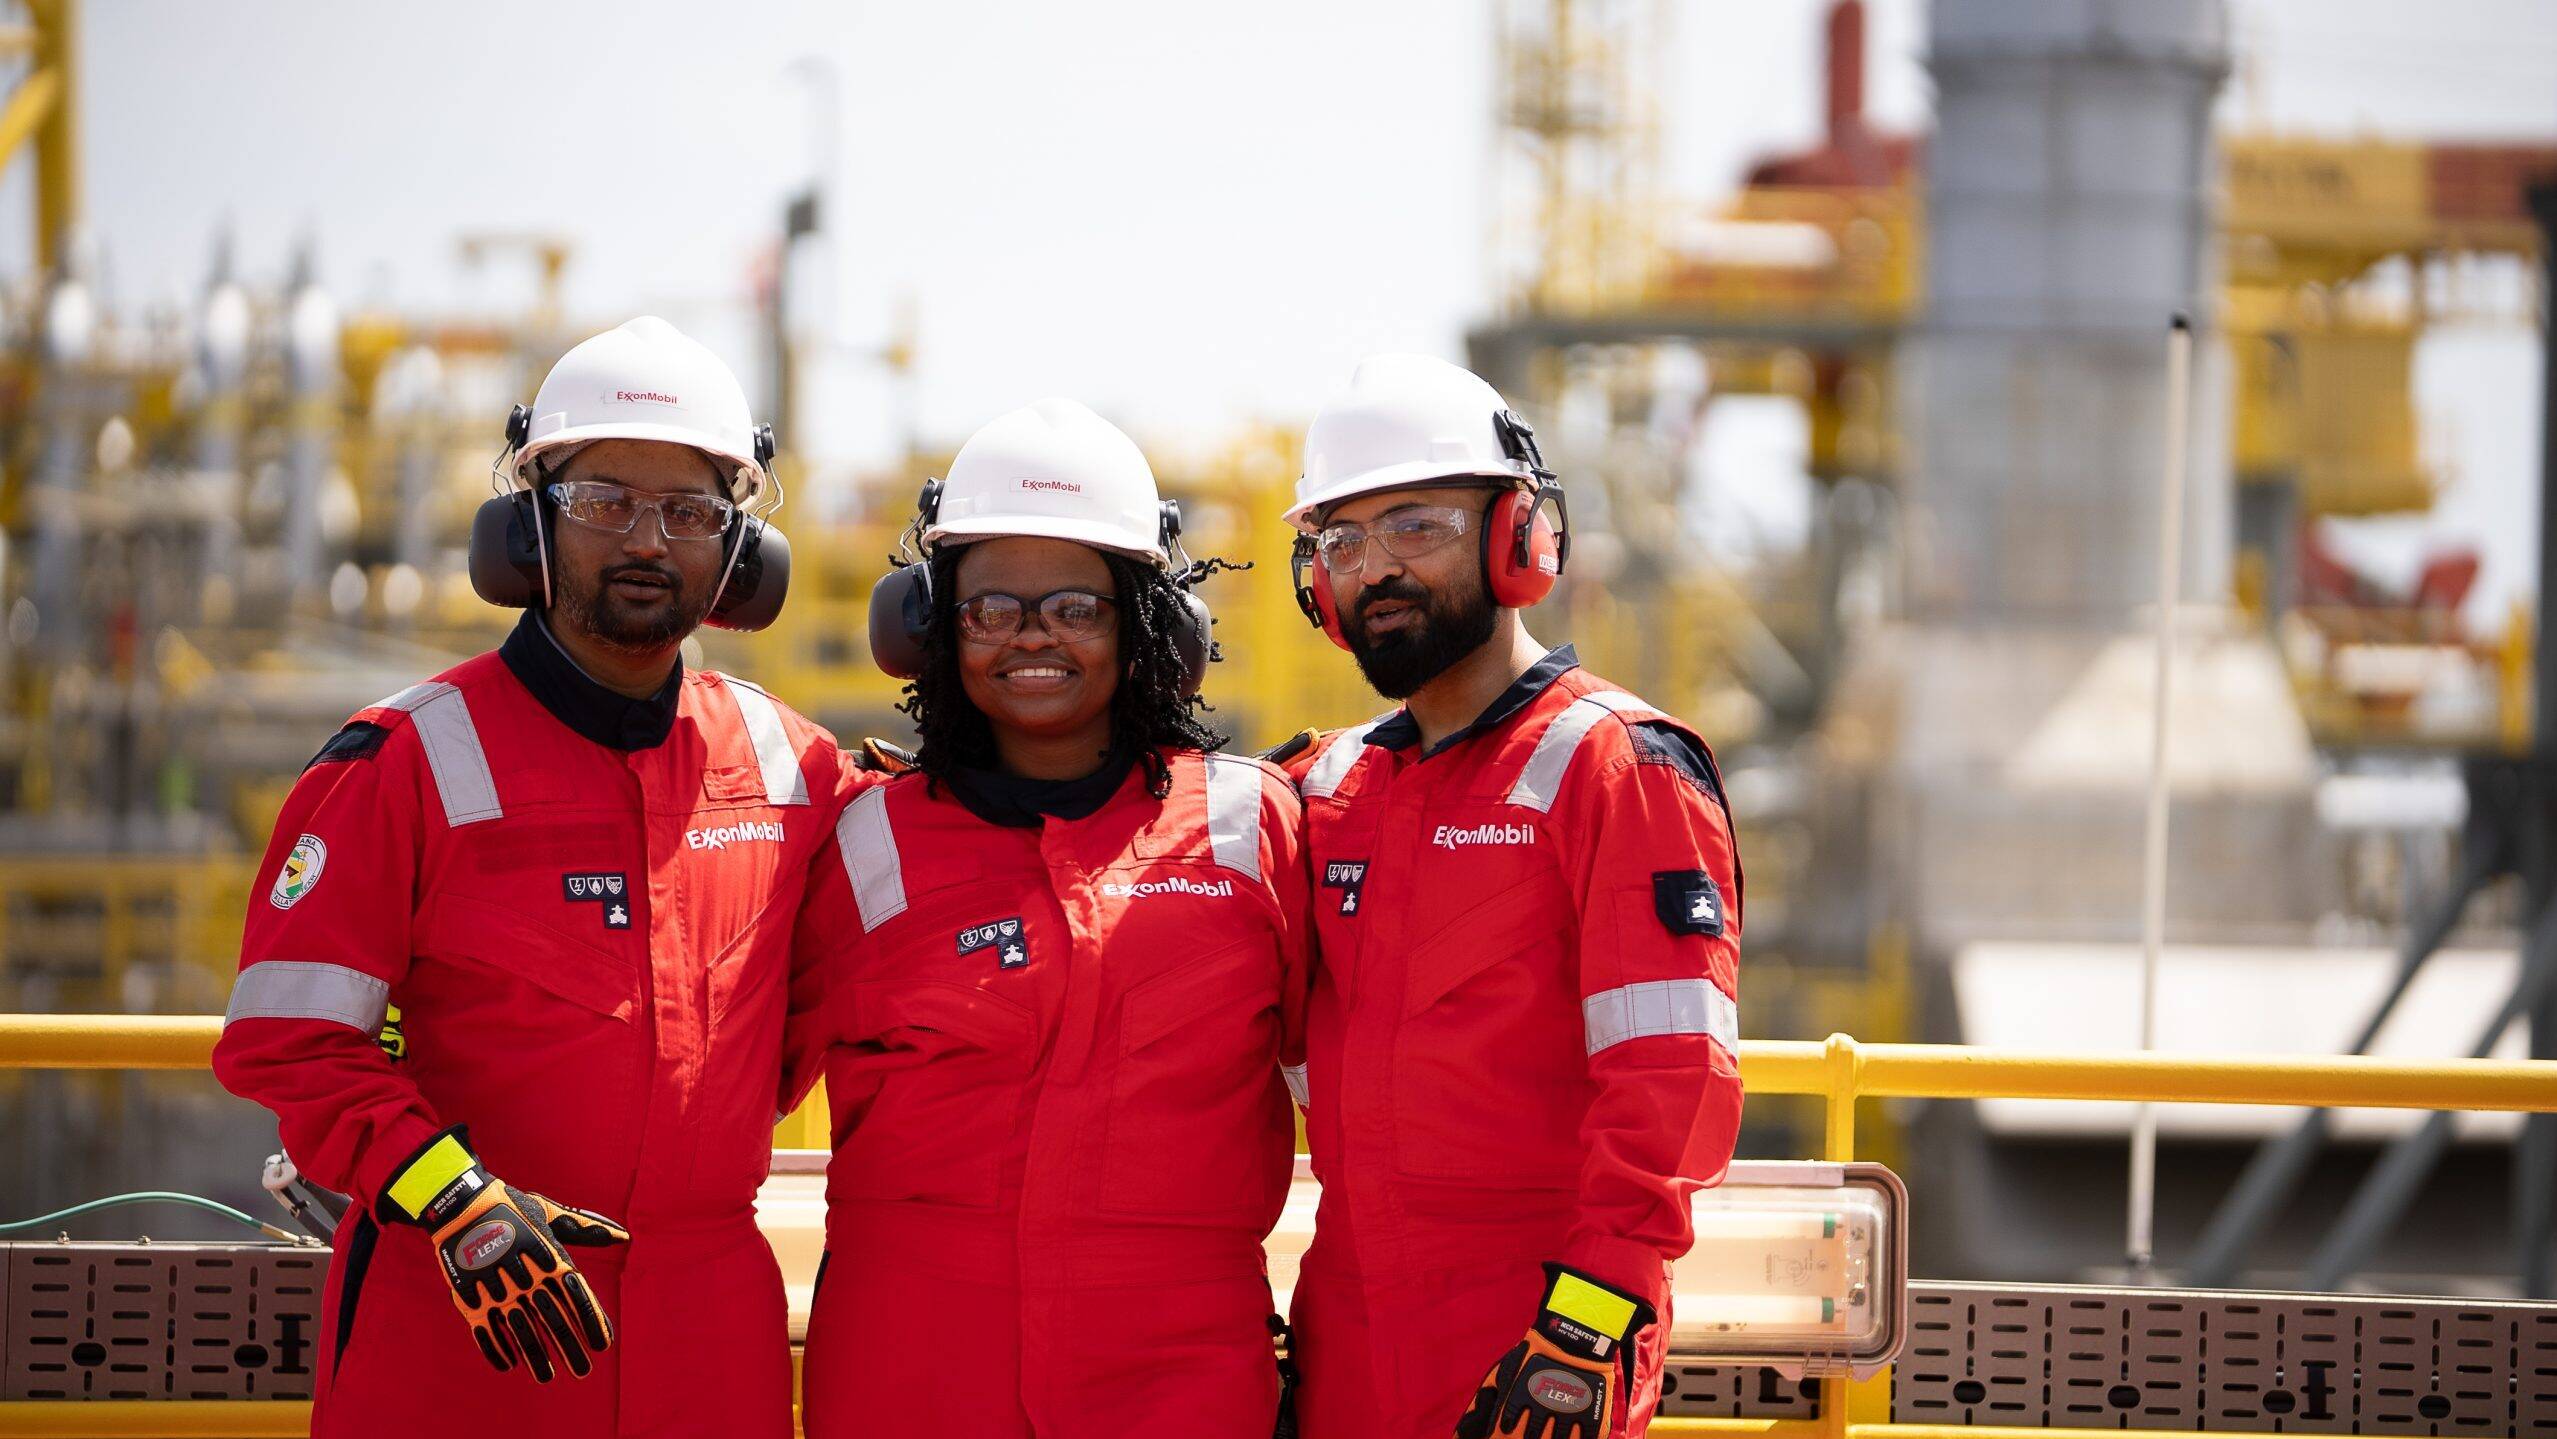 Based in the Stabroek Block, over 100 miles offshore Guyana, Liza Unity adds an additional 220,000 barrels of oil per day to the global market, bringing production capacity in Guyana to more than 350,000 barrels per day in 2022. This translates to 20 gallons of gas and 12 gallons of diesel or heating oil per barrel.